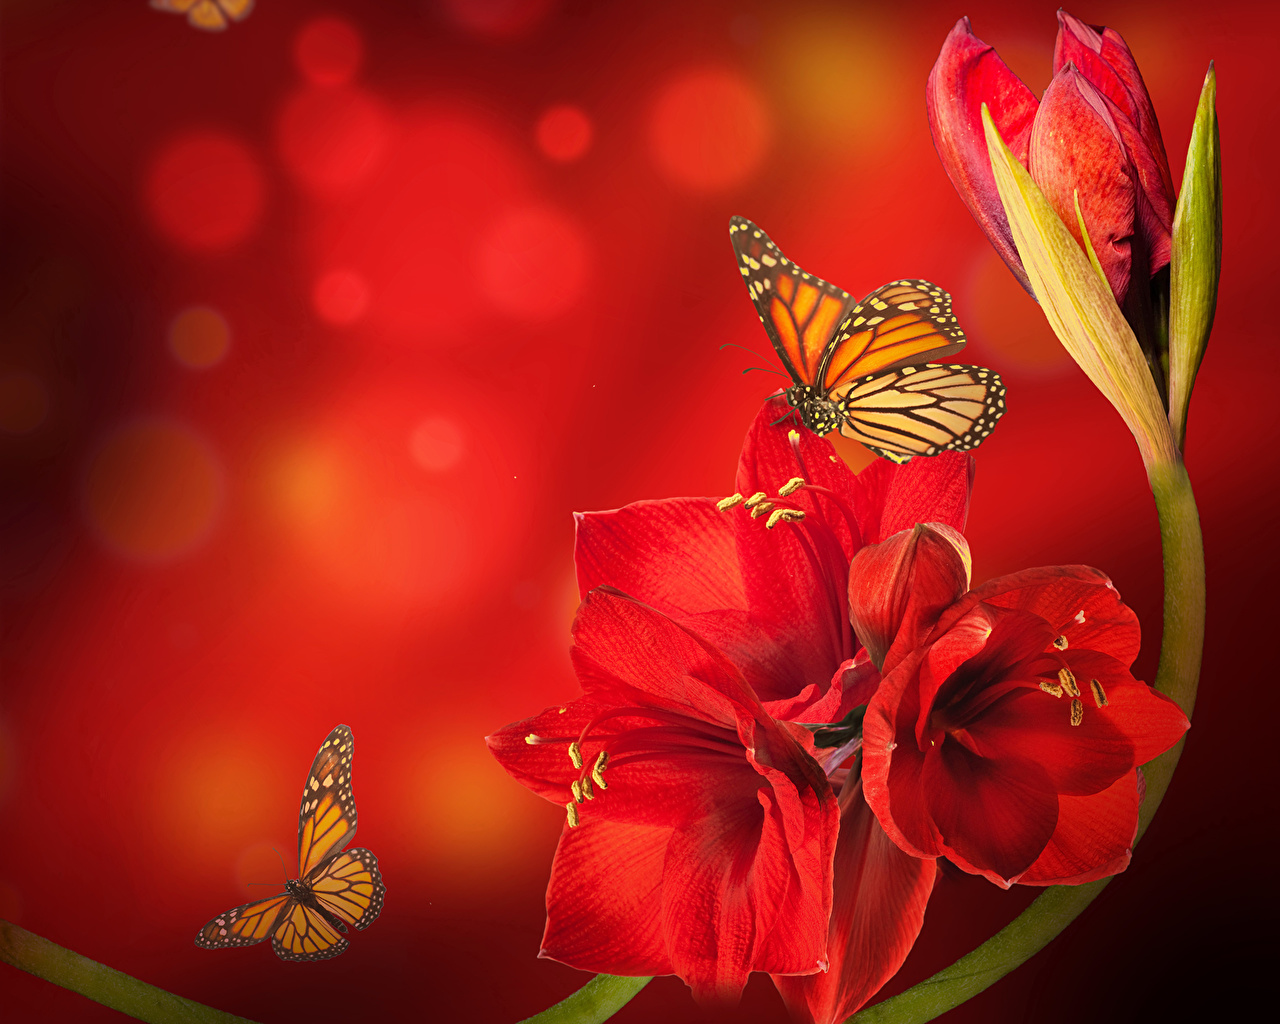 Red Flower With Butterfly - HD Wallpaper 